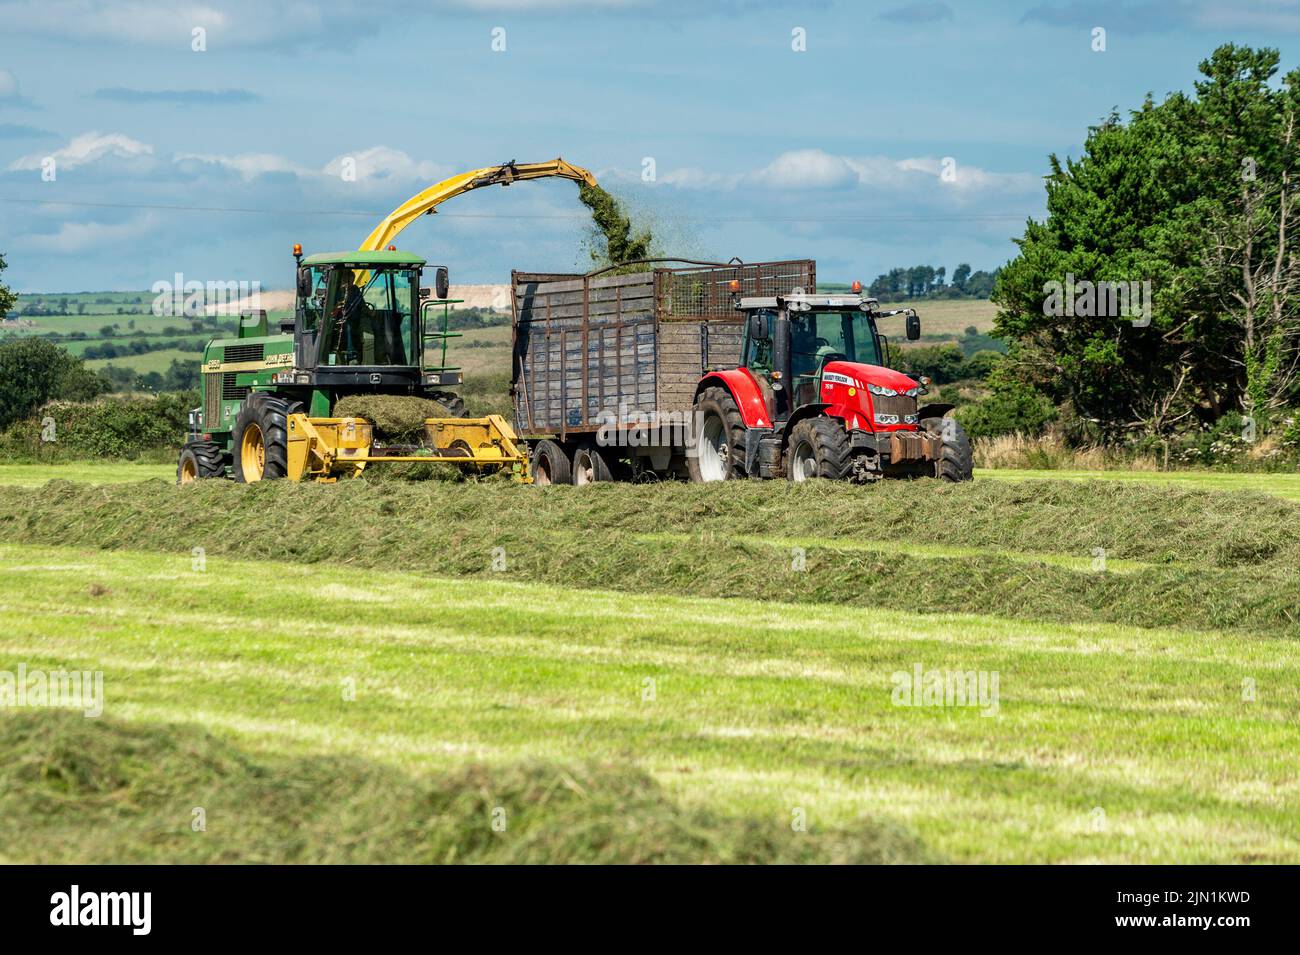 Clonakilty, West Cork, Ireland. 8th Aug, 2022. On a hot and sunny day in West Cork, dairy farmer Mervyn Helen collects silage using a 1998 John Deere 6850 forage harvester. Mervyn milks a herd of 300 cows in Clonakilty. Credit: AG News/Alamy Live News Stock Photo